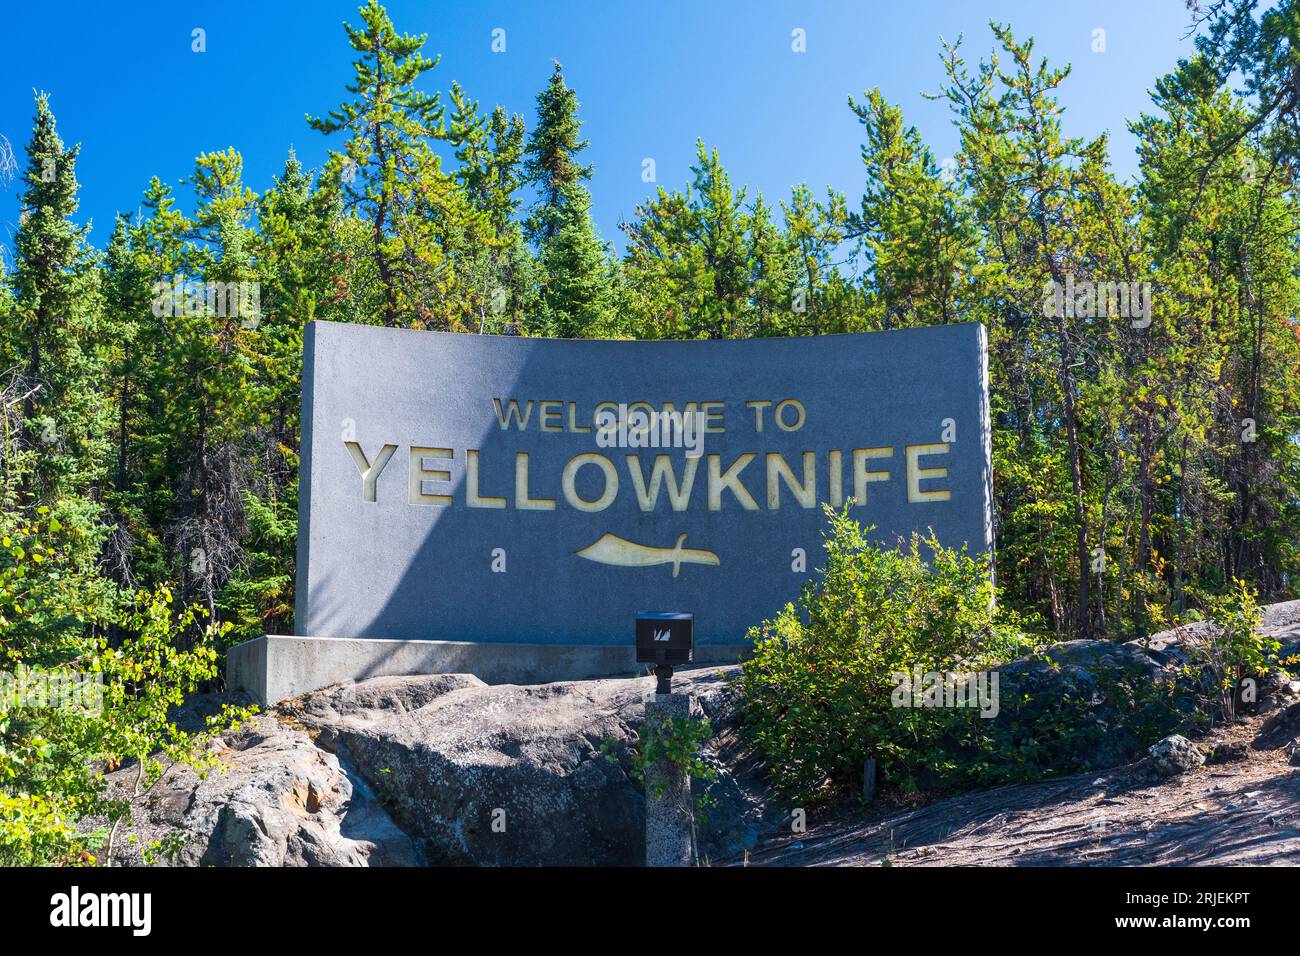 Yellowknife, NT  Canada - 13 AUG 2022: Welcome sign as you enter Yellowknife, Northwest Territories, Canada Stock Photo